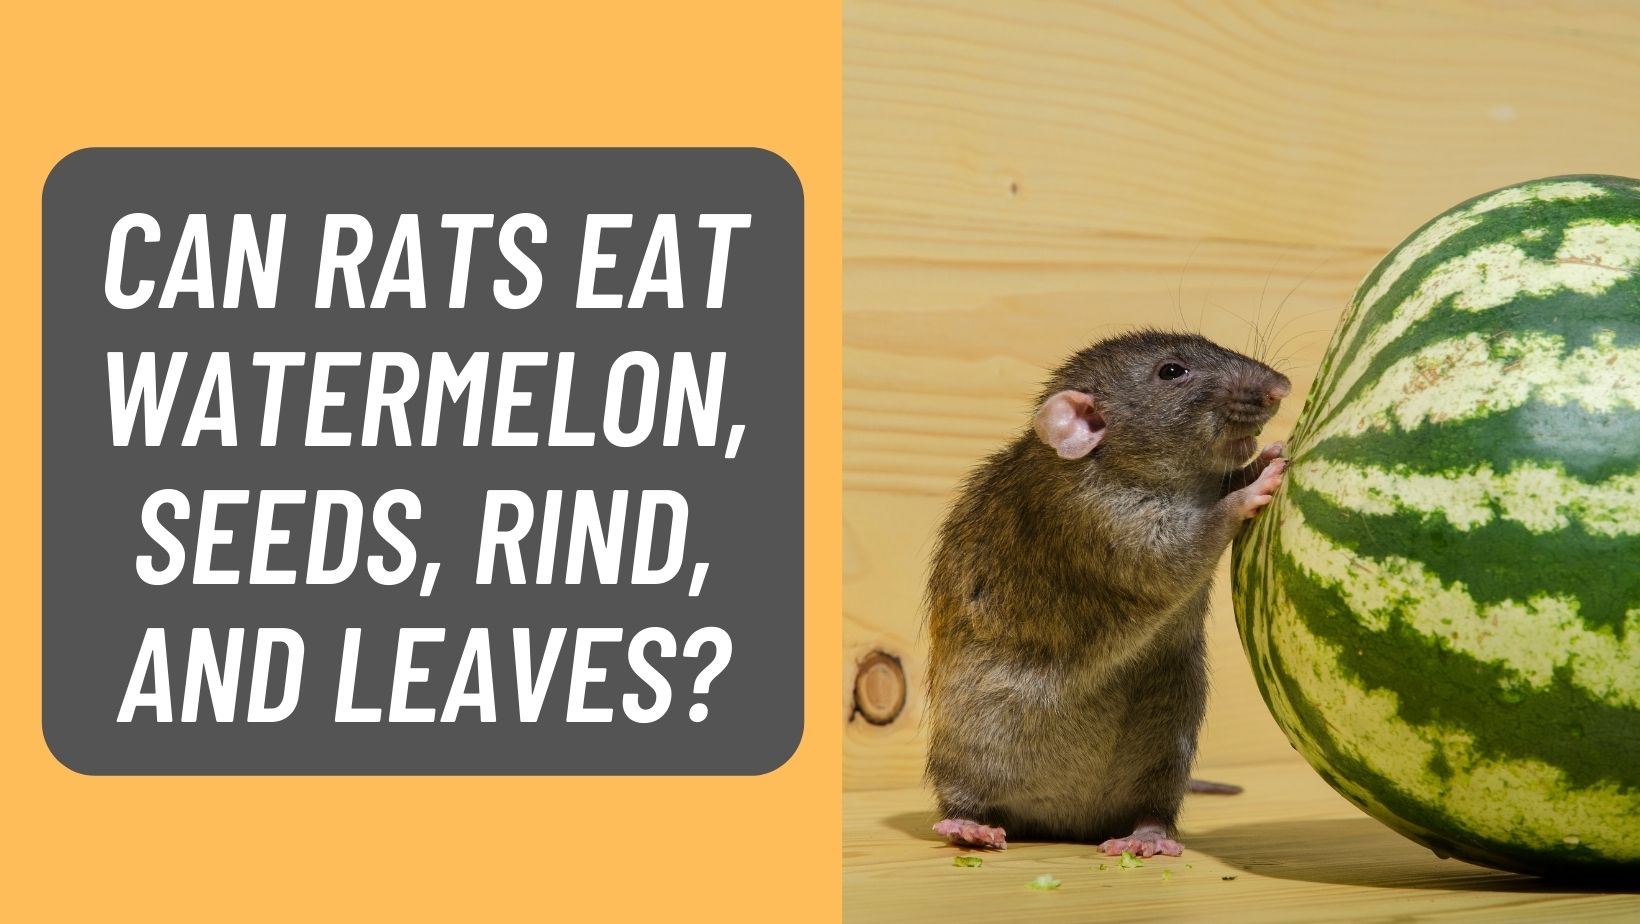 Can Rats Eat Watermelon, Seeds, Rind, Leaves? -LEARN MORE